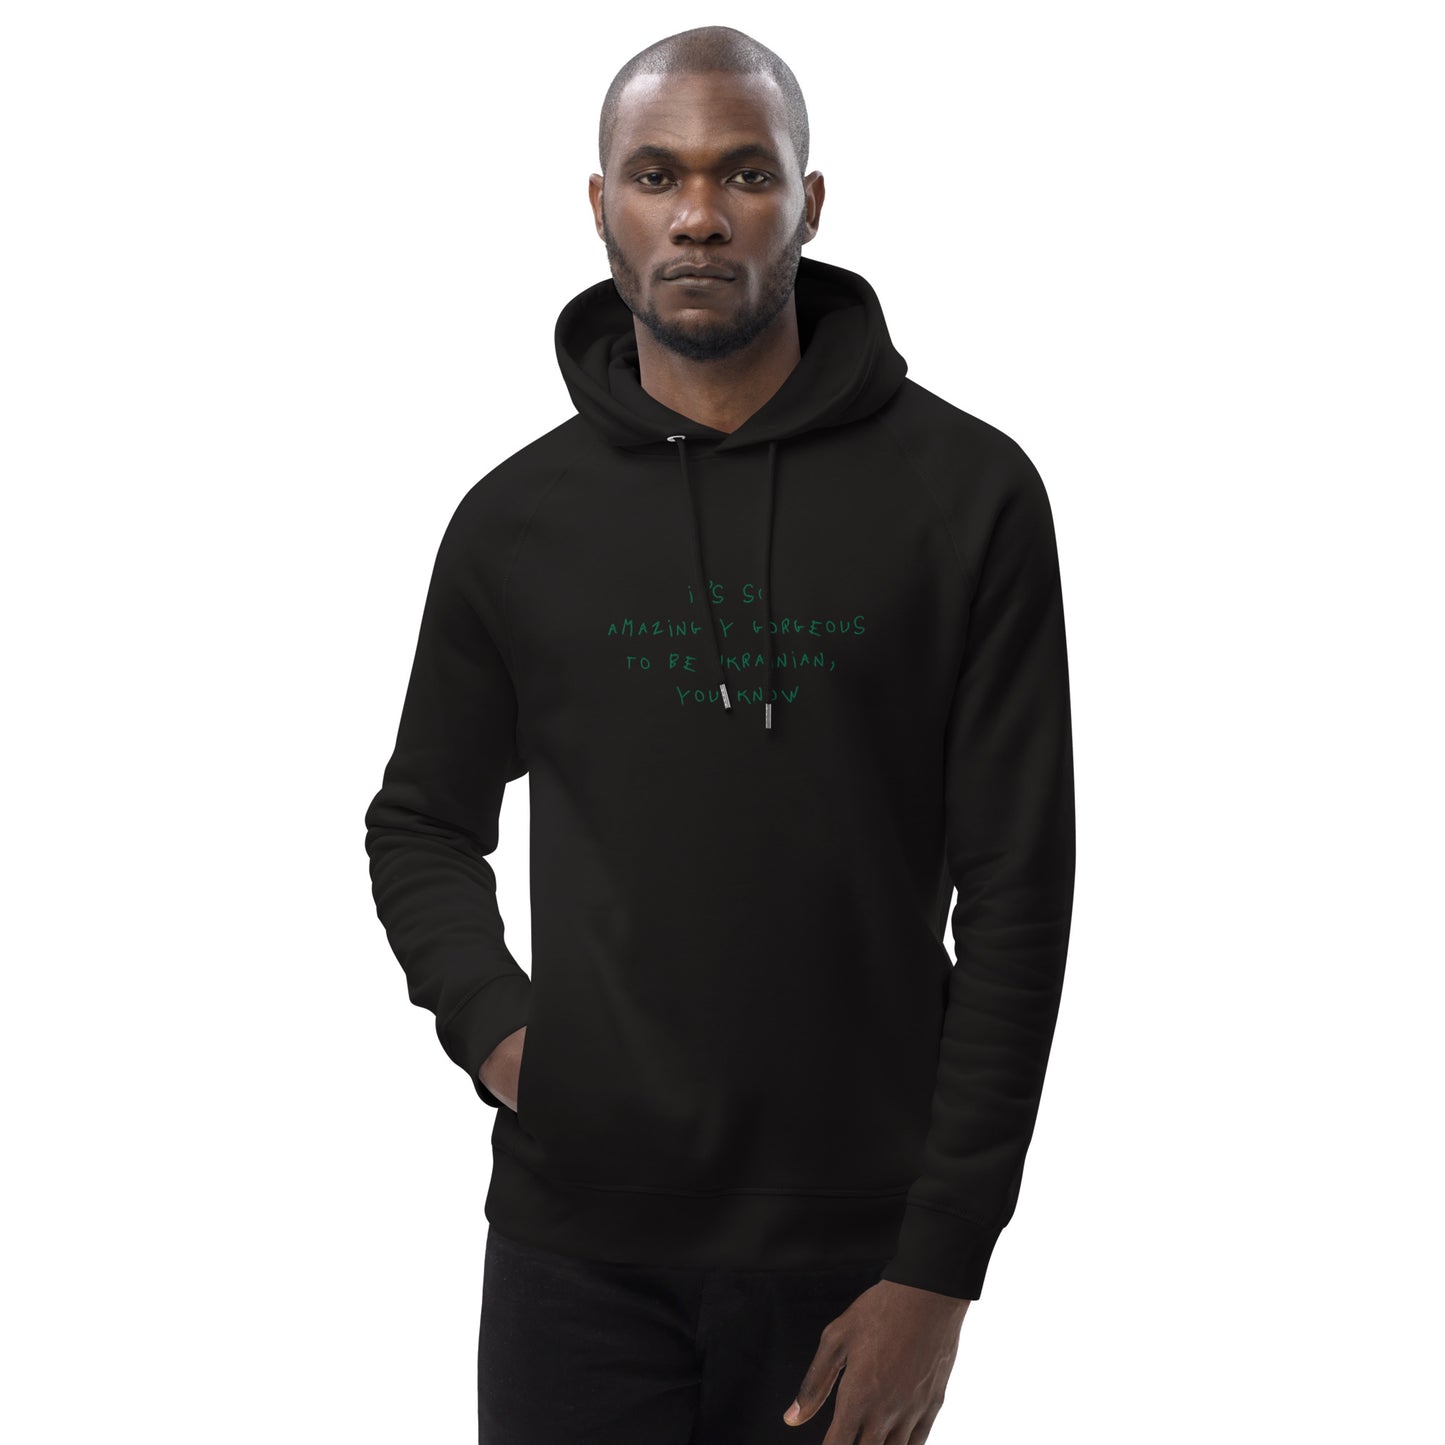 Amazingly gorgeous unisex pullover hoodie in black